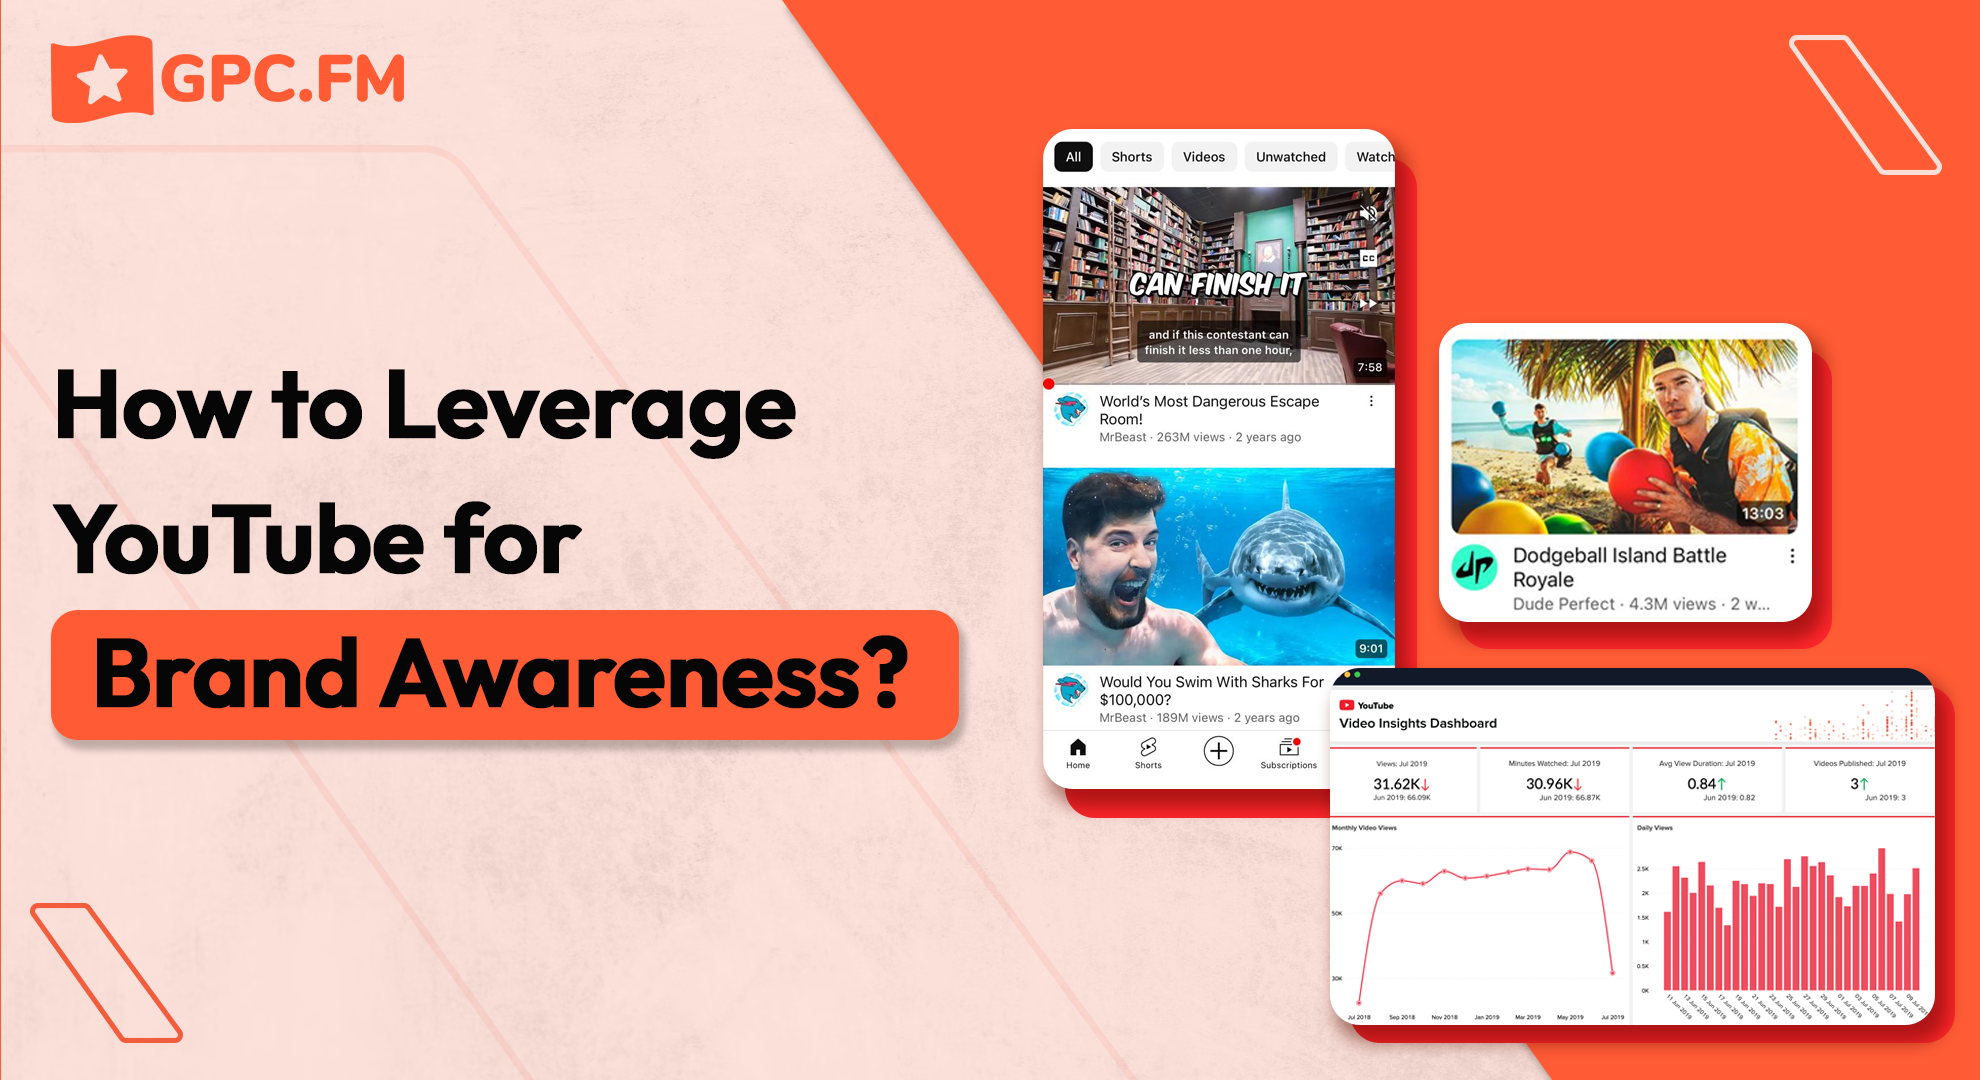 How to Leverage YouTube for Brand Awareness?